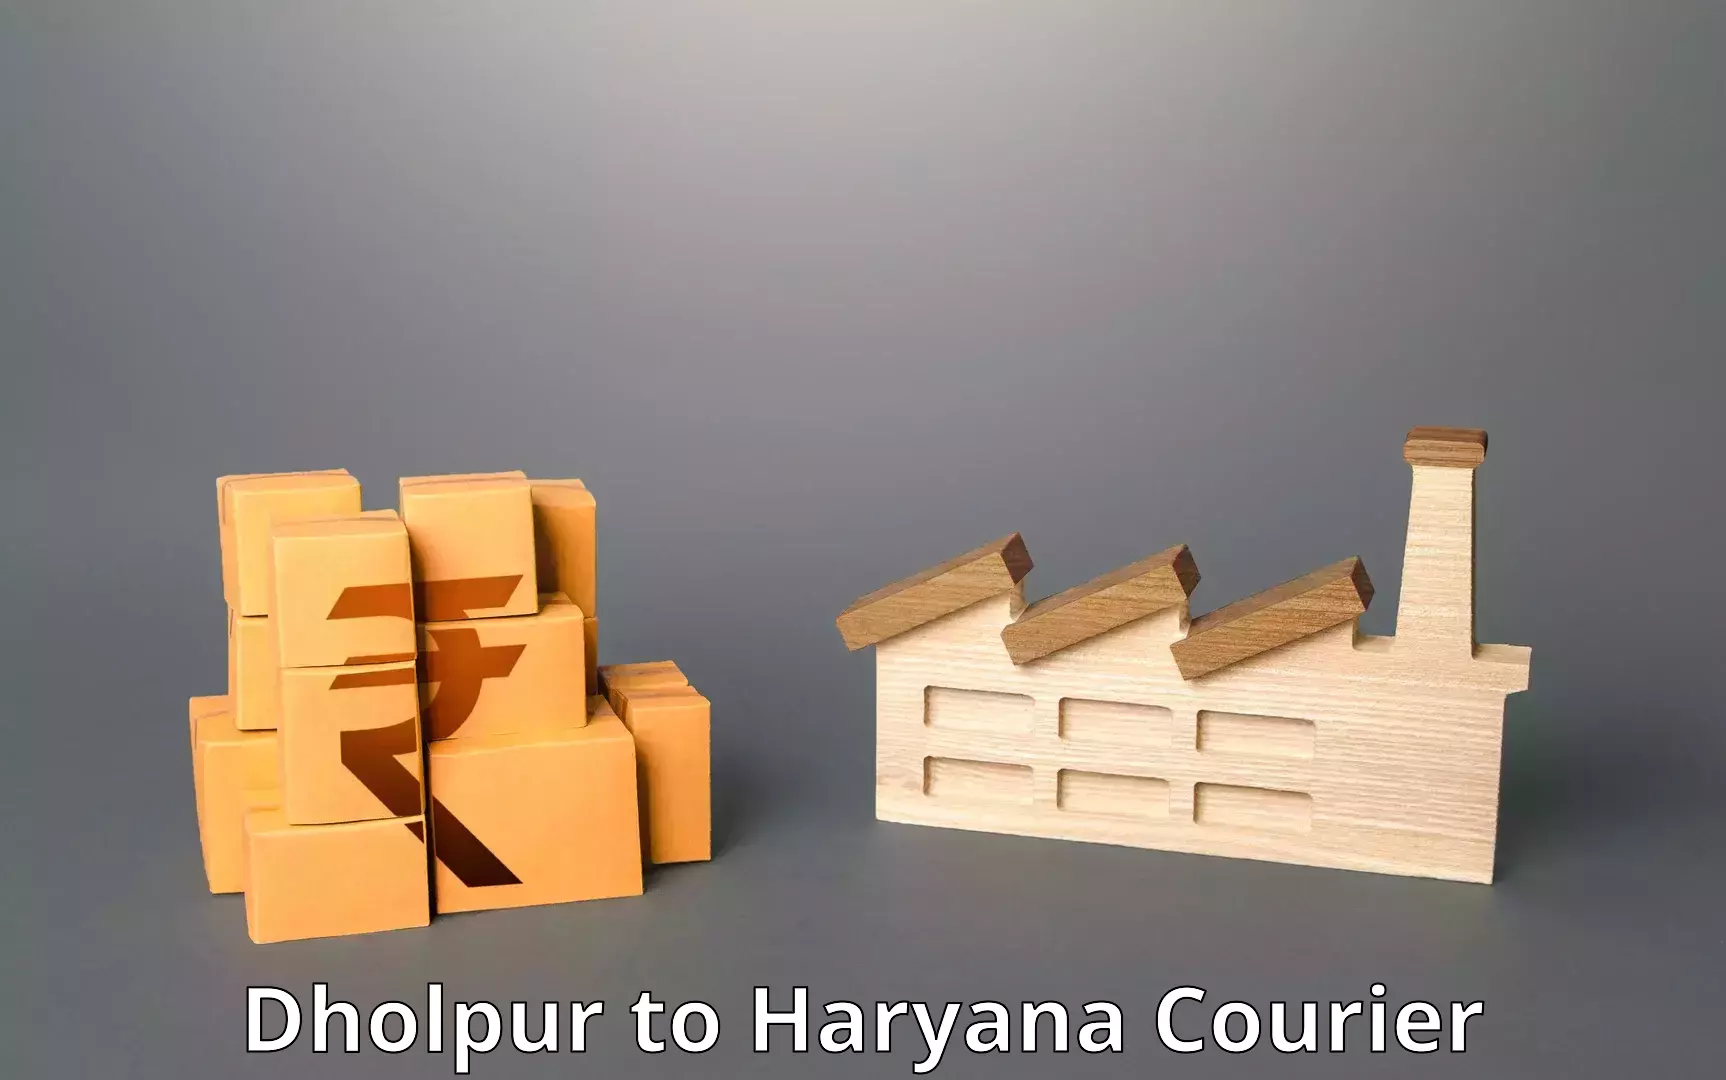 Comprehensive shipping network Dholpur to Bilaspur Haryana